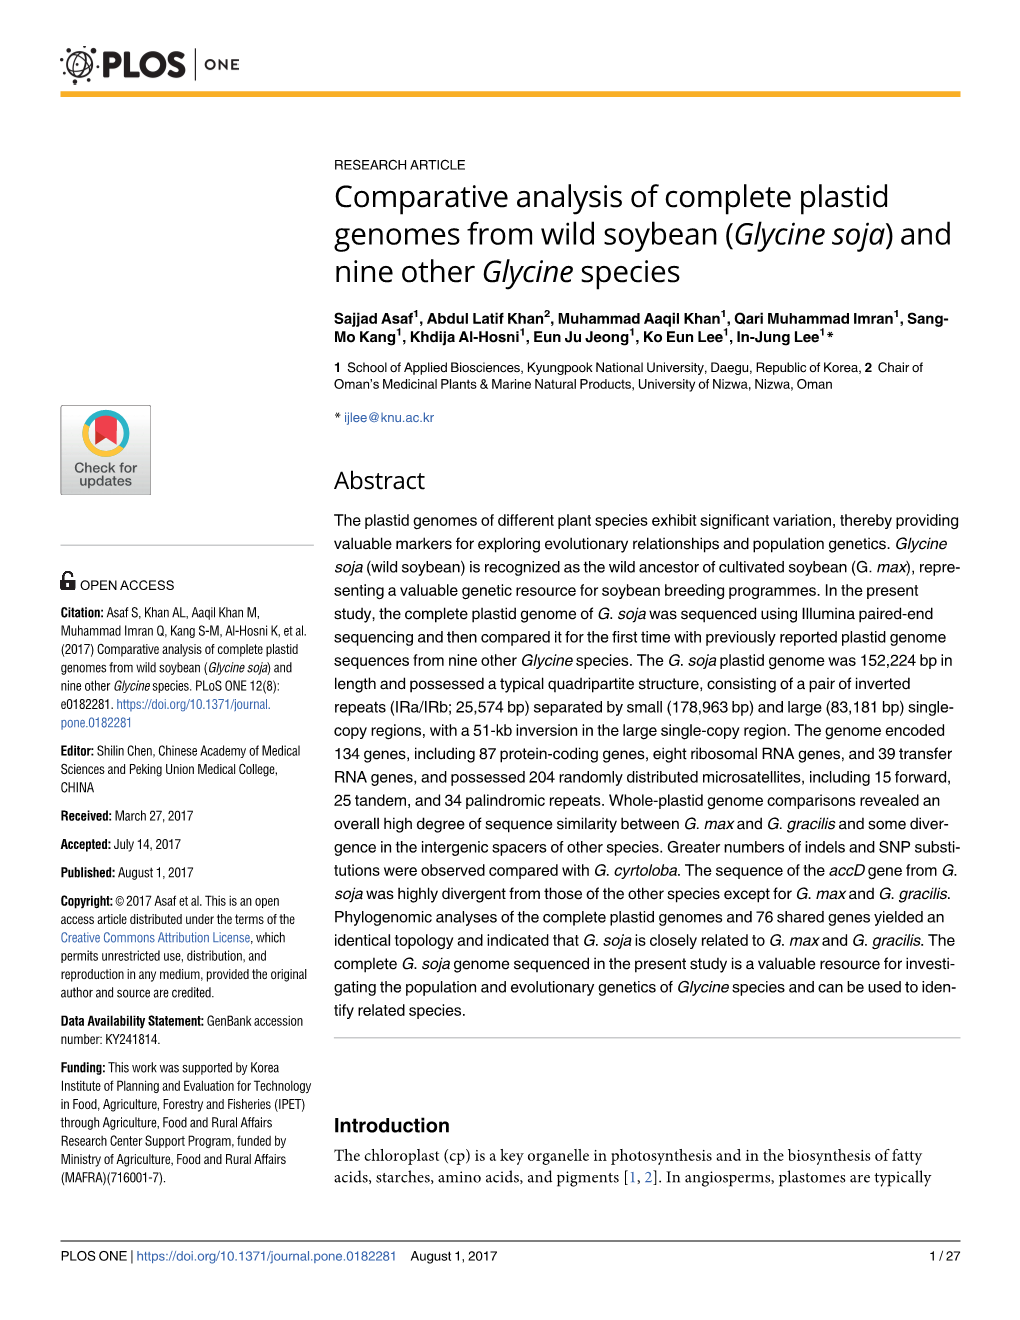 Comparative Analysis of Complete Plastid Genomes from Wild Soybean (Glycine Soja) and Nine Other Glycine Species